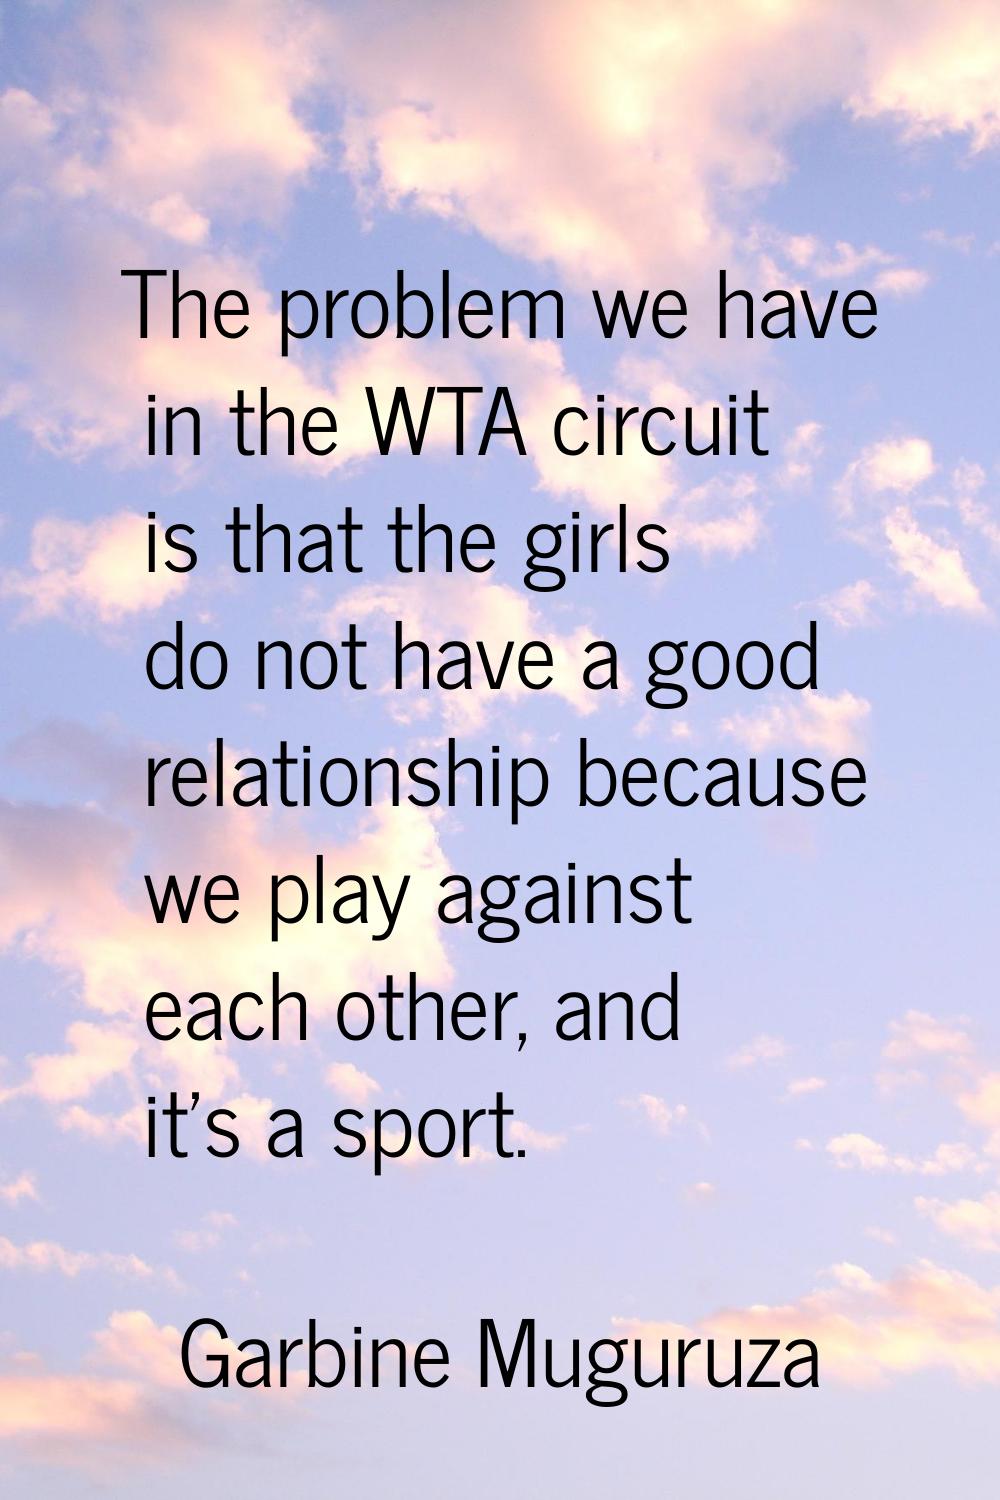 The problem we have in the WTA circuit is that the girls do not have a good relationship because we